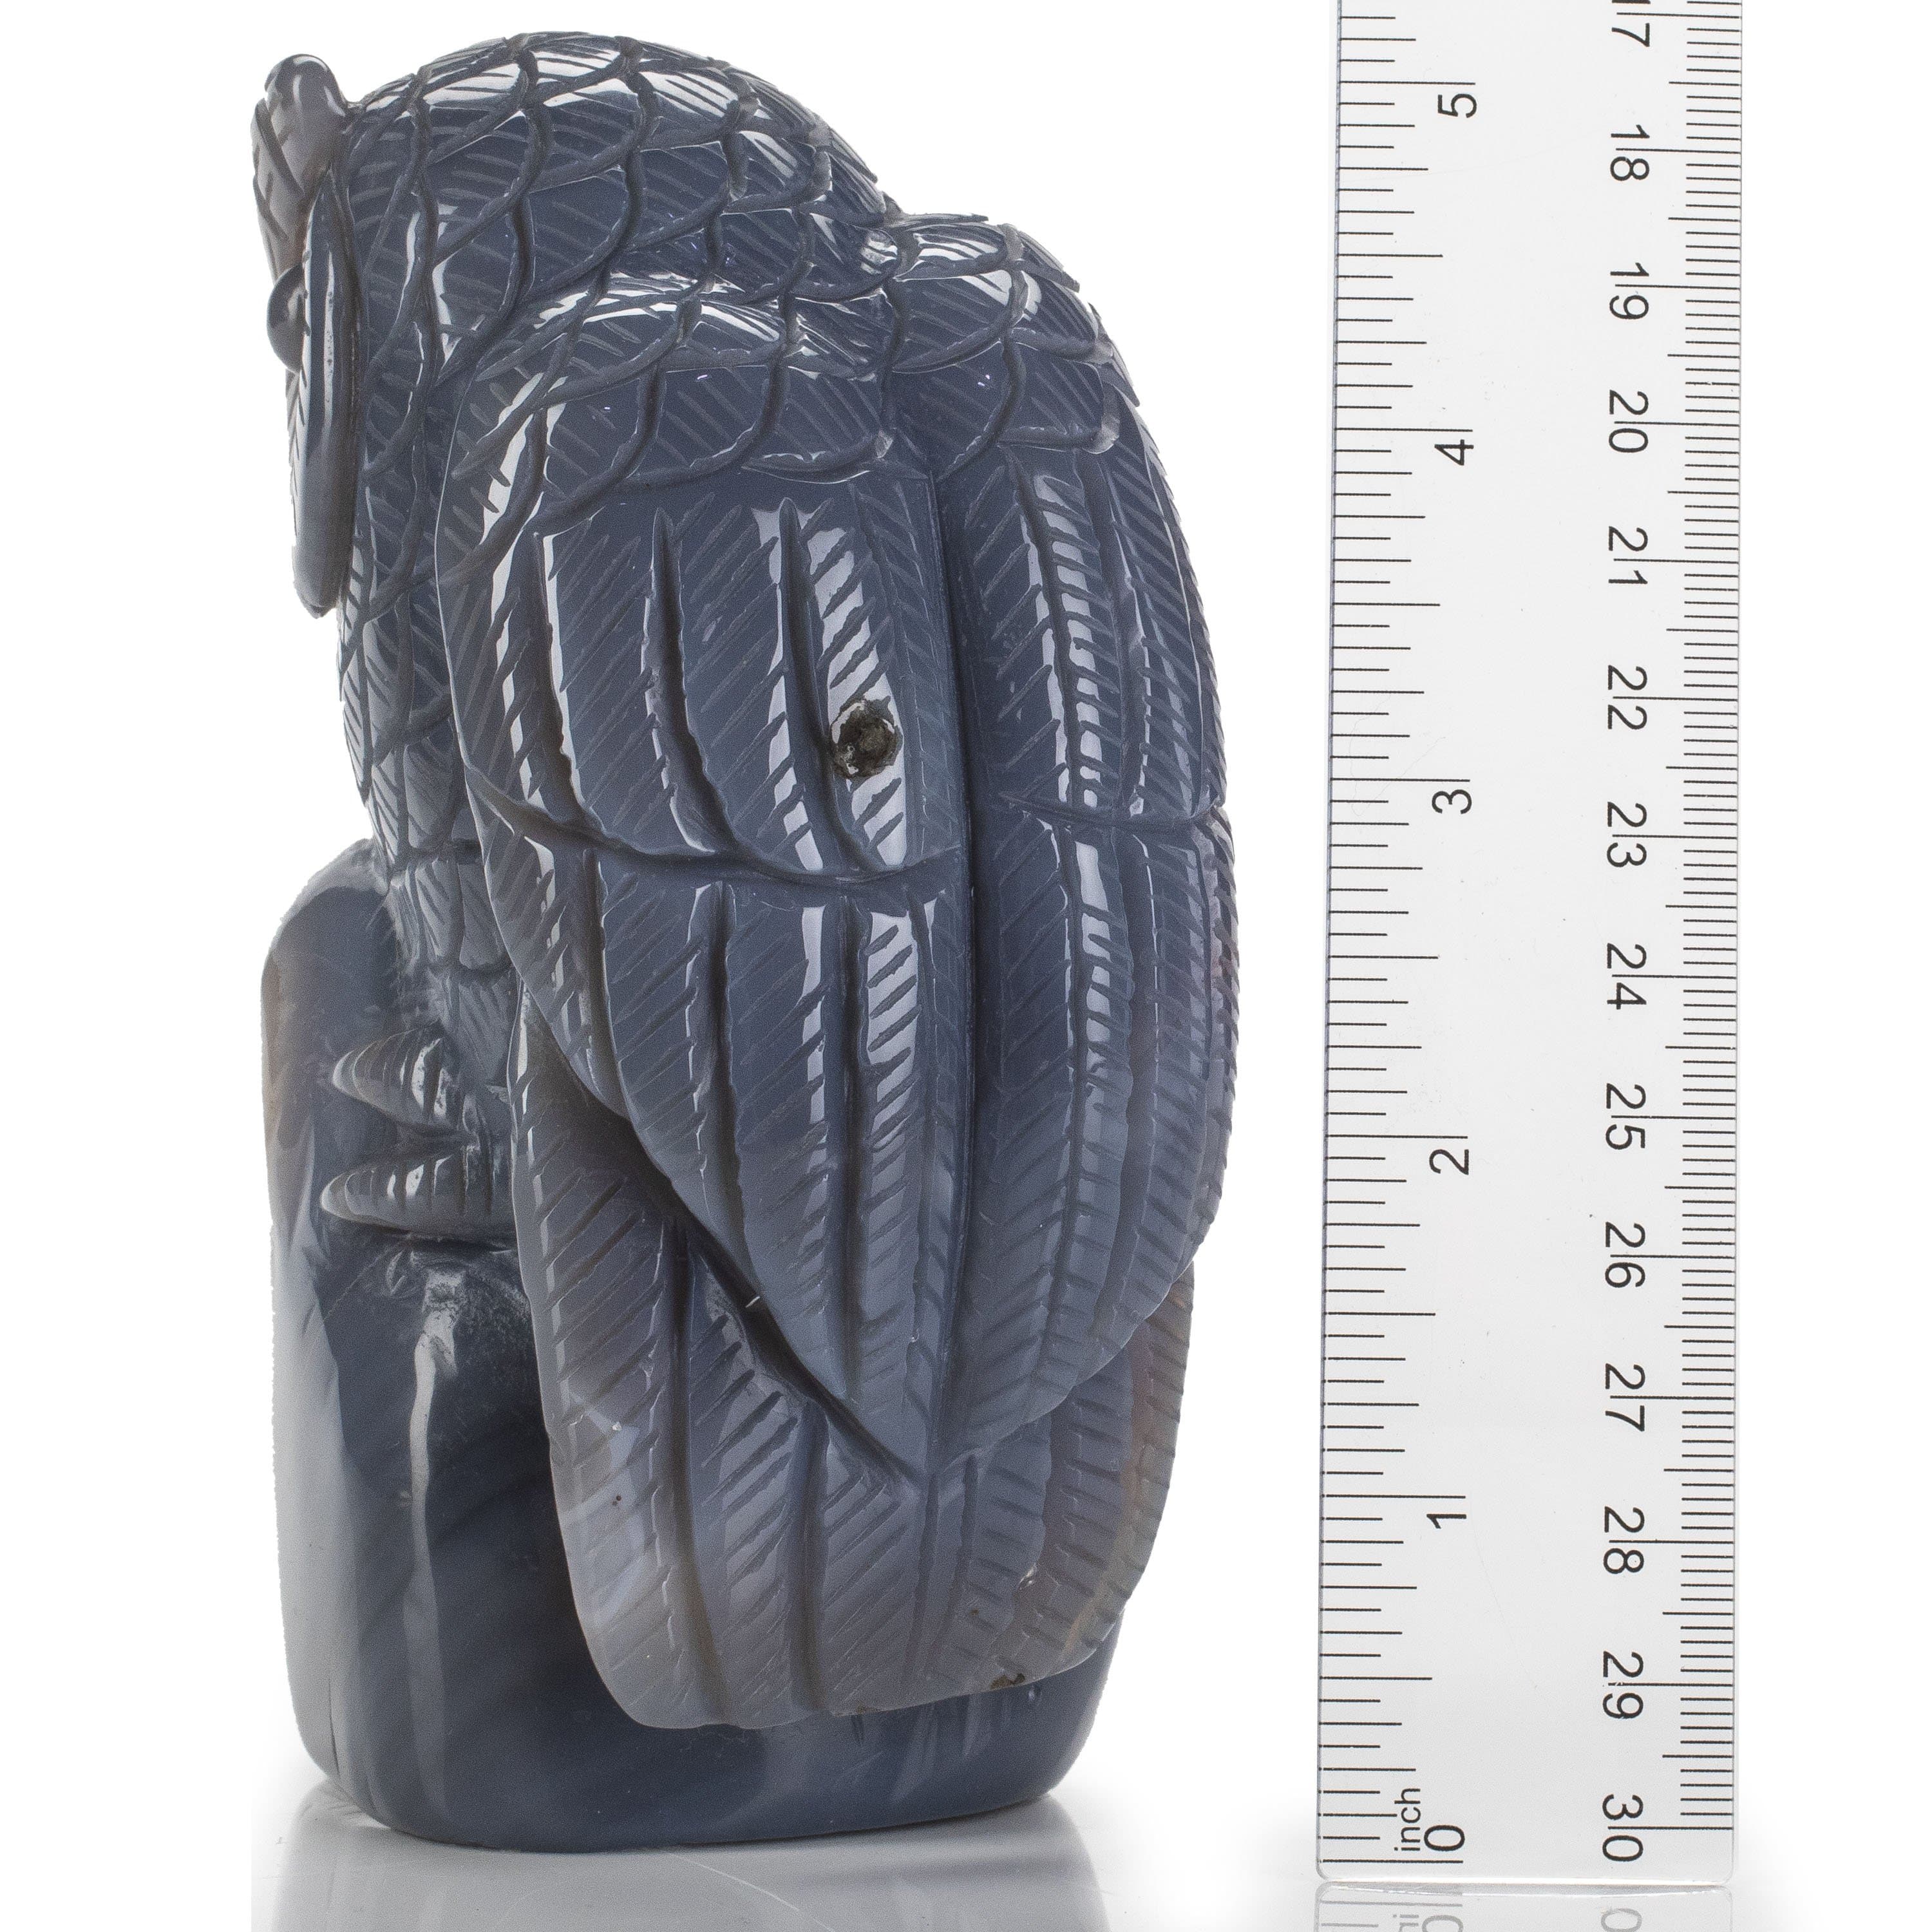 Kalifano Gemstone Carvings Natural Brazilian Blue Lace Agate Owl Animal Carving - 5.2 in CV298.002